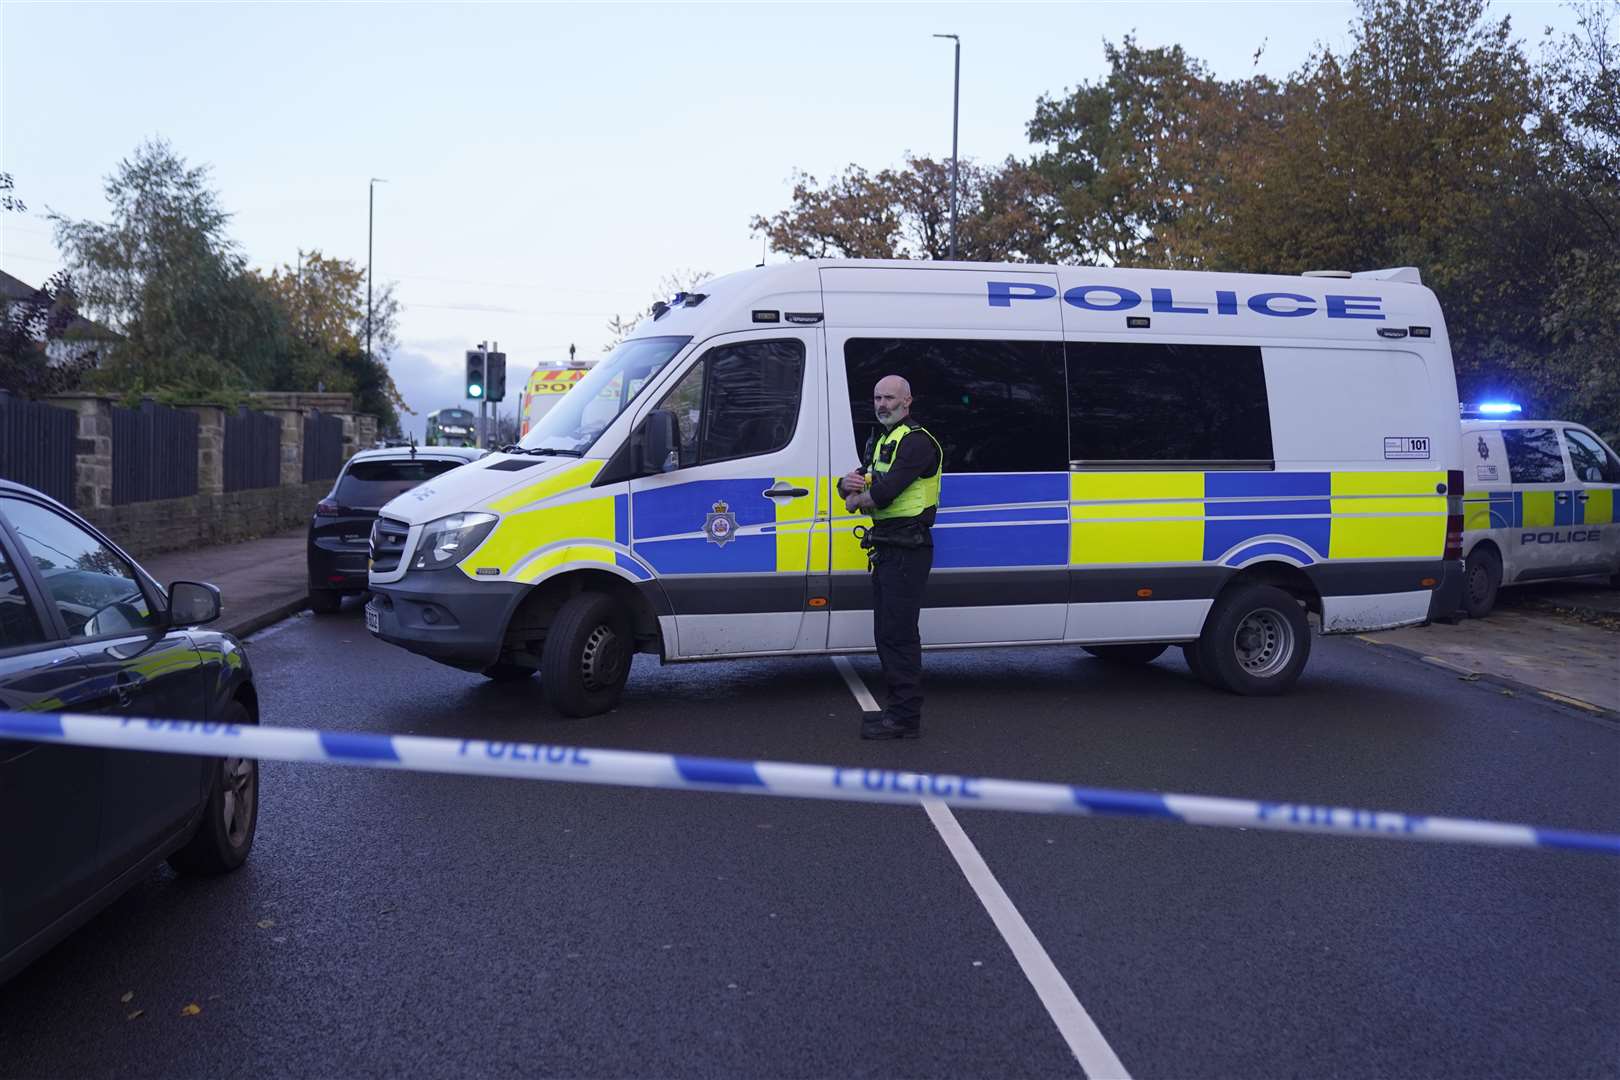 A teenage boy has been arrested in connection with the incident (Danny Lawson/PA)